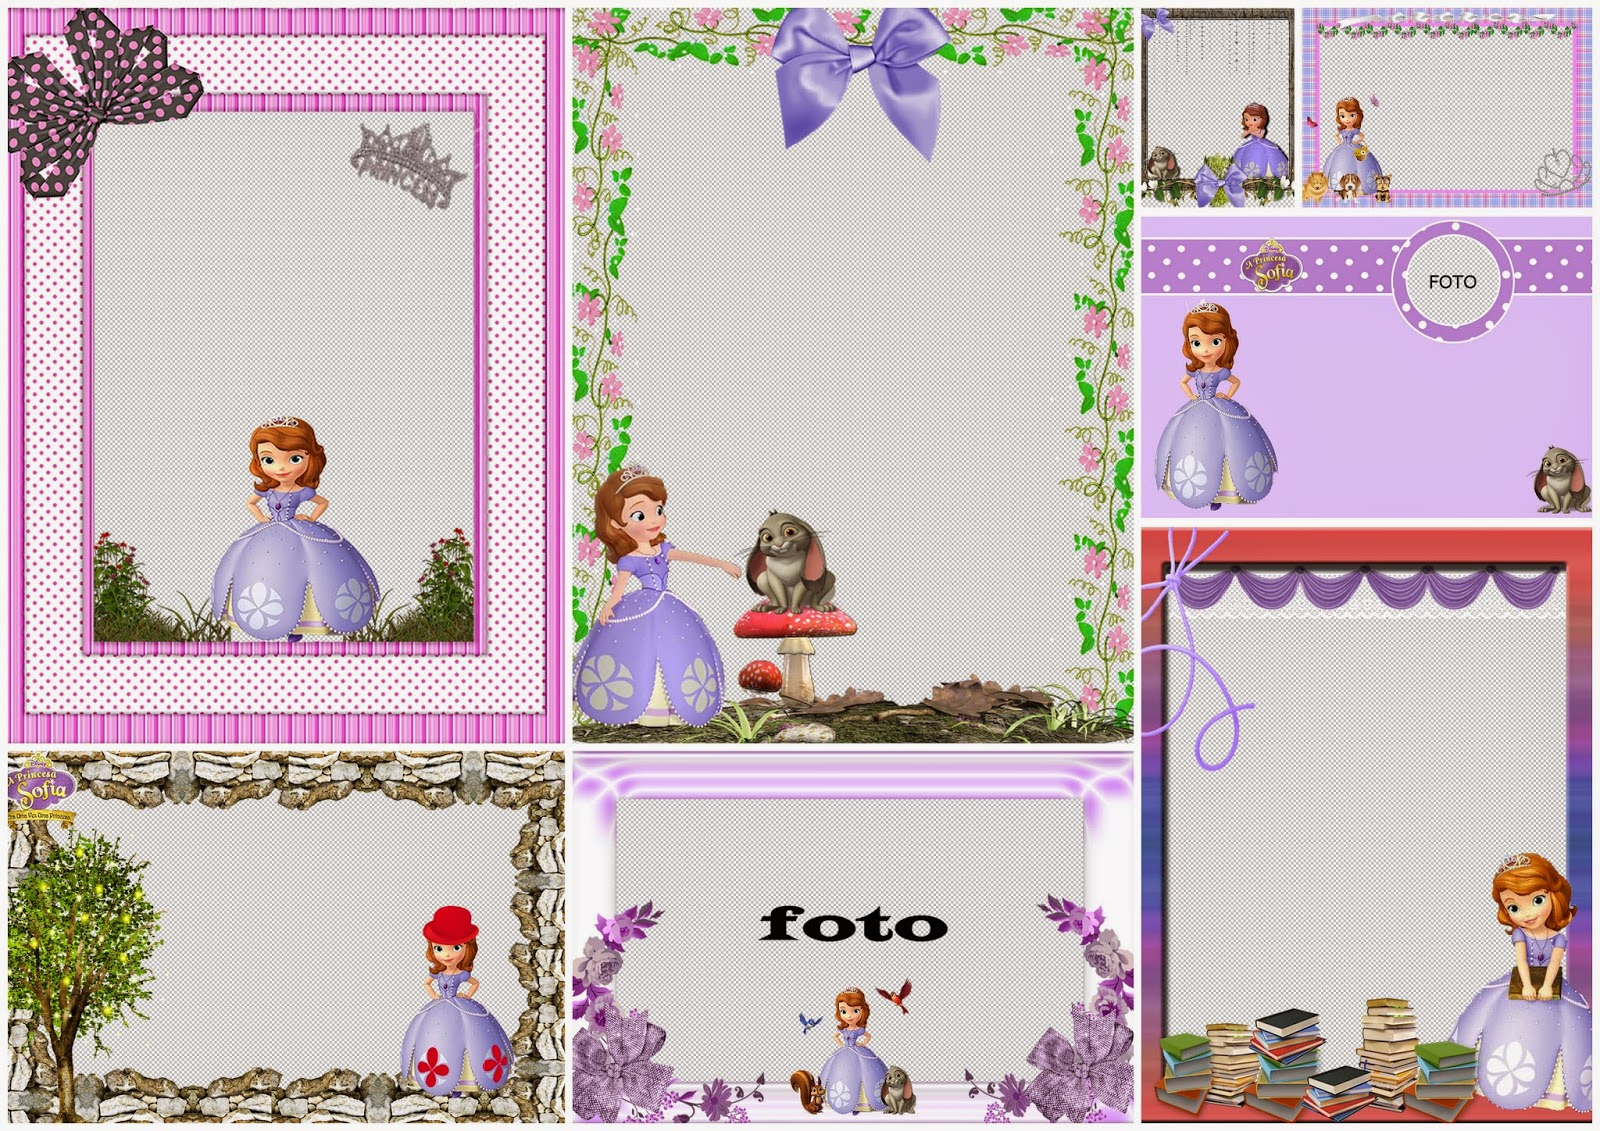 Sofia The First Free Printable Invitations Or Photo Frames. | Oh My - Free Printable Princess Invitation Cards